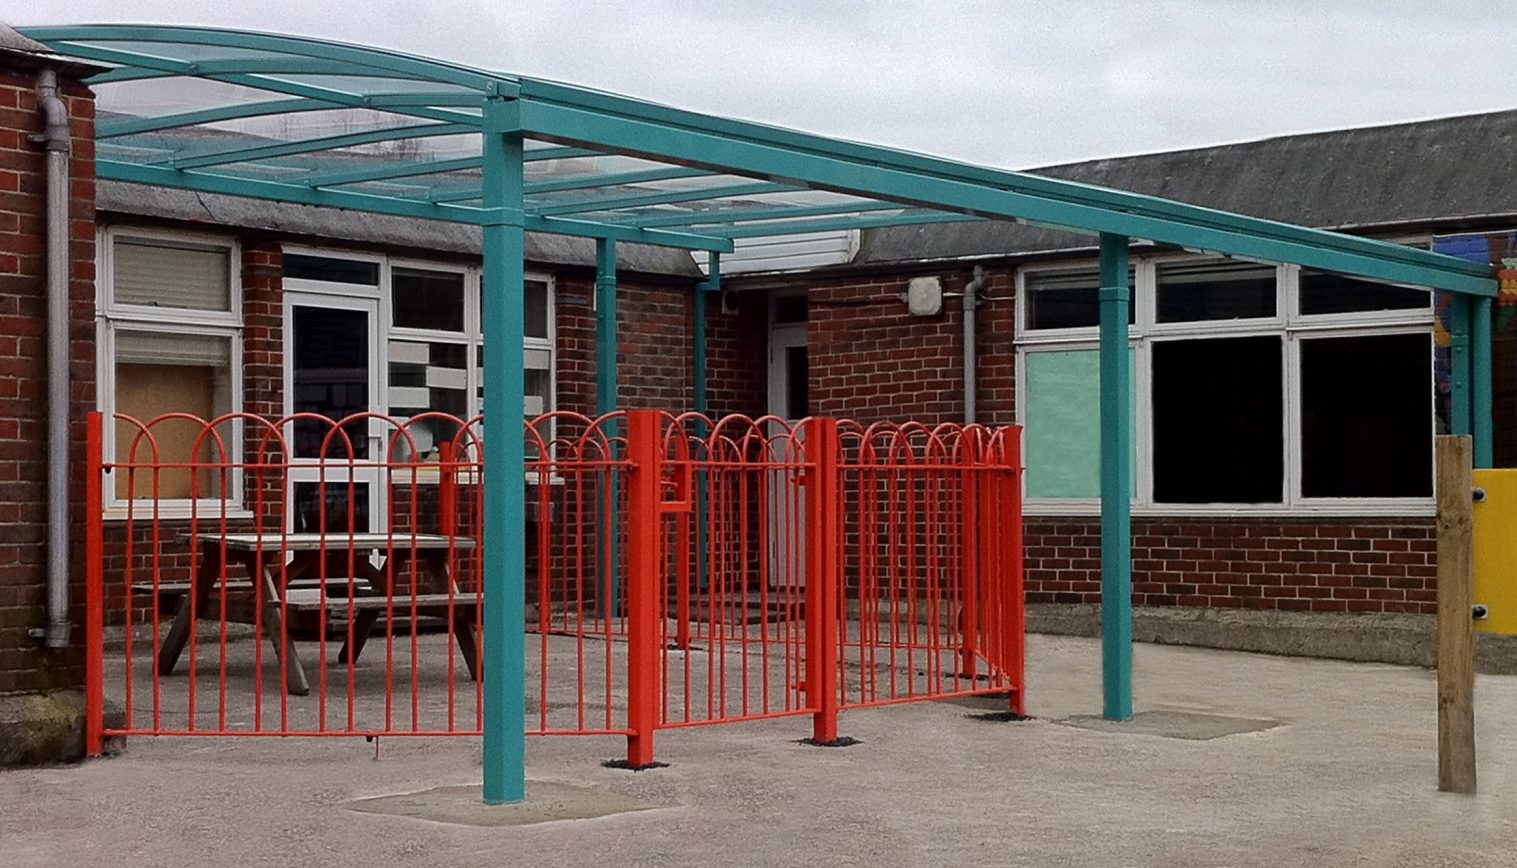 St Saviours Primary School – 2nd Free Standing Canopy